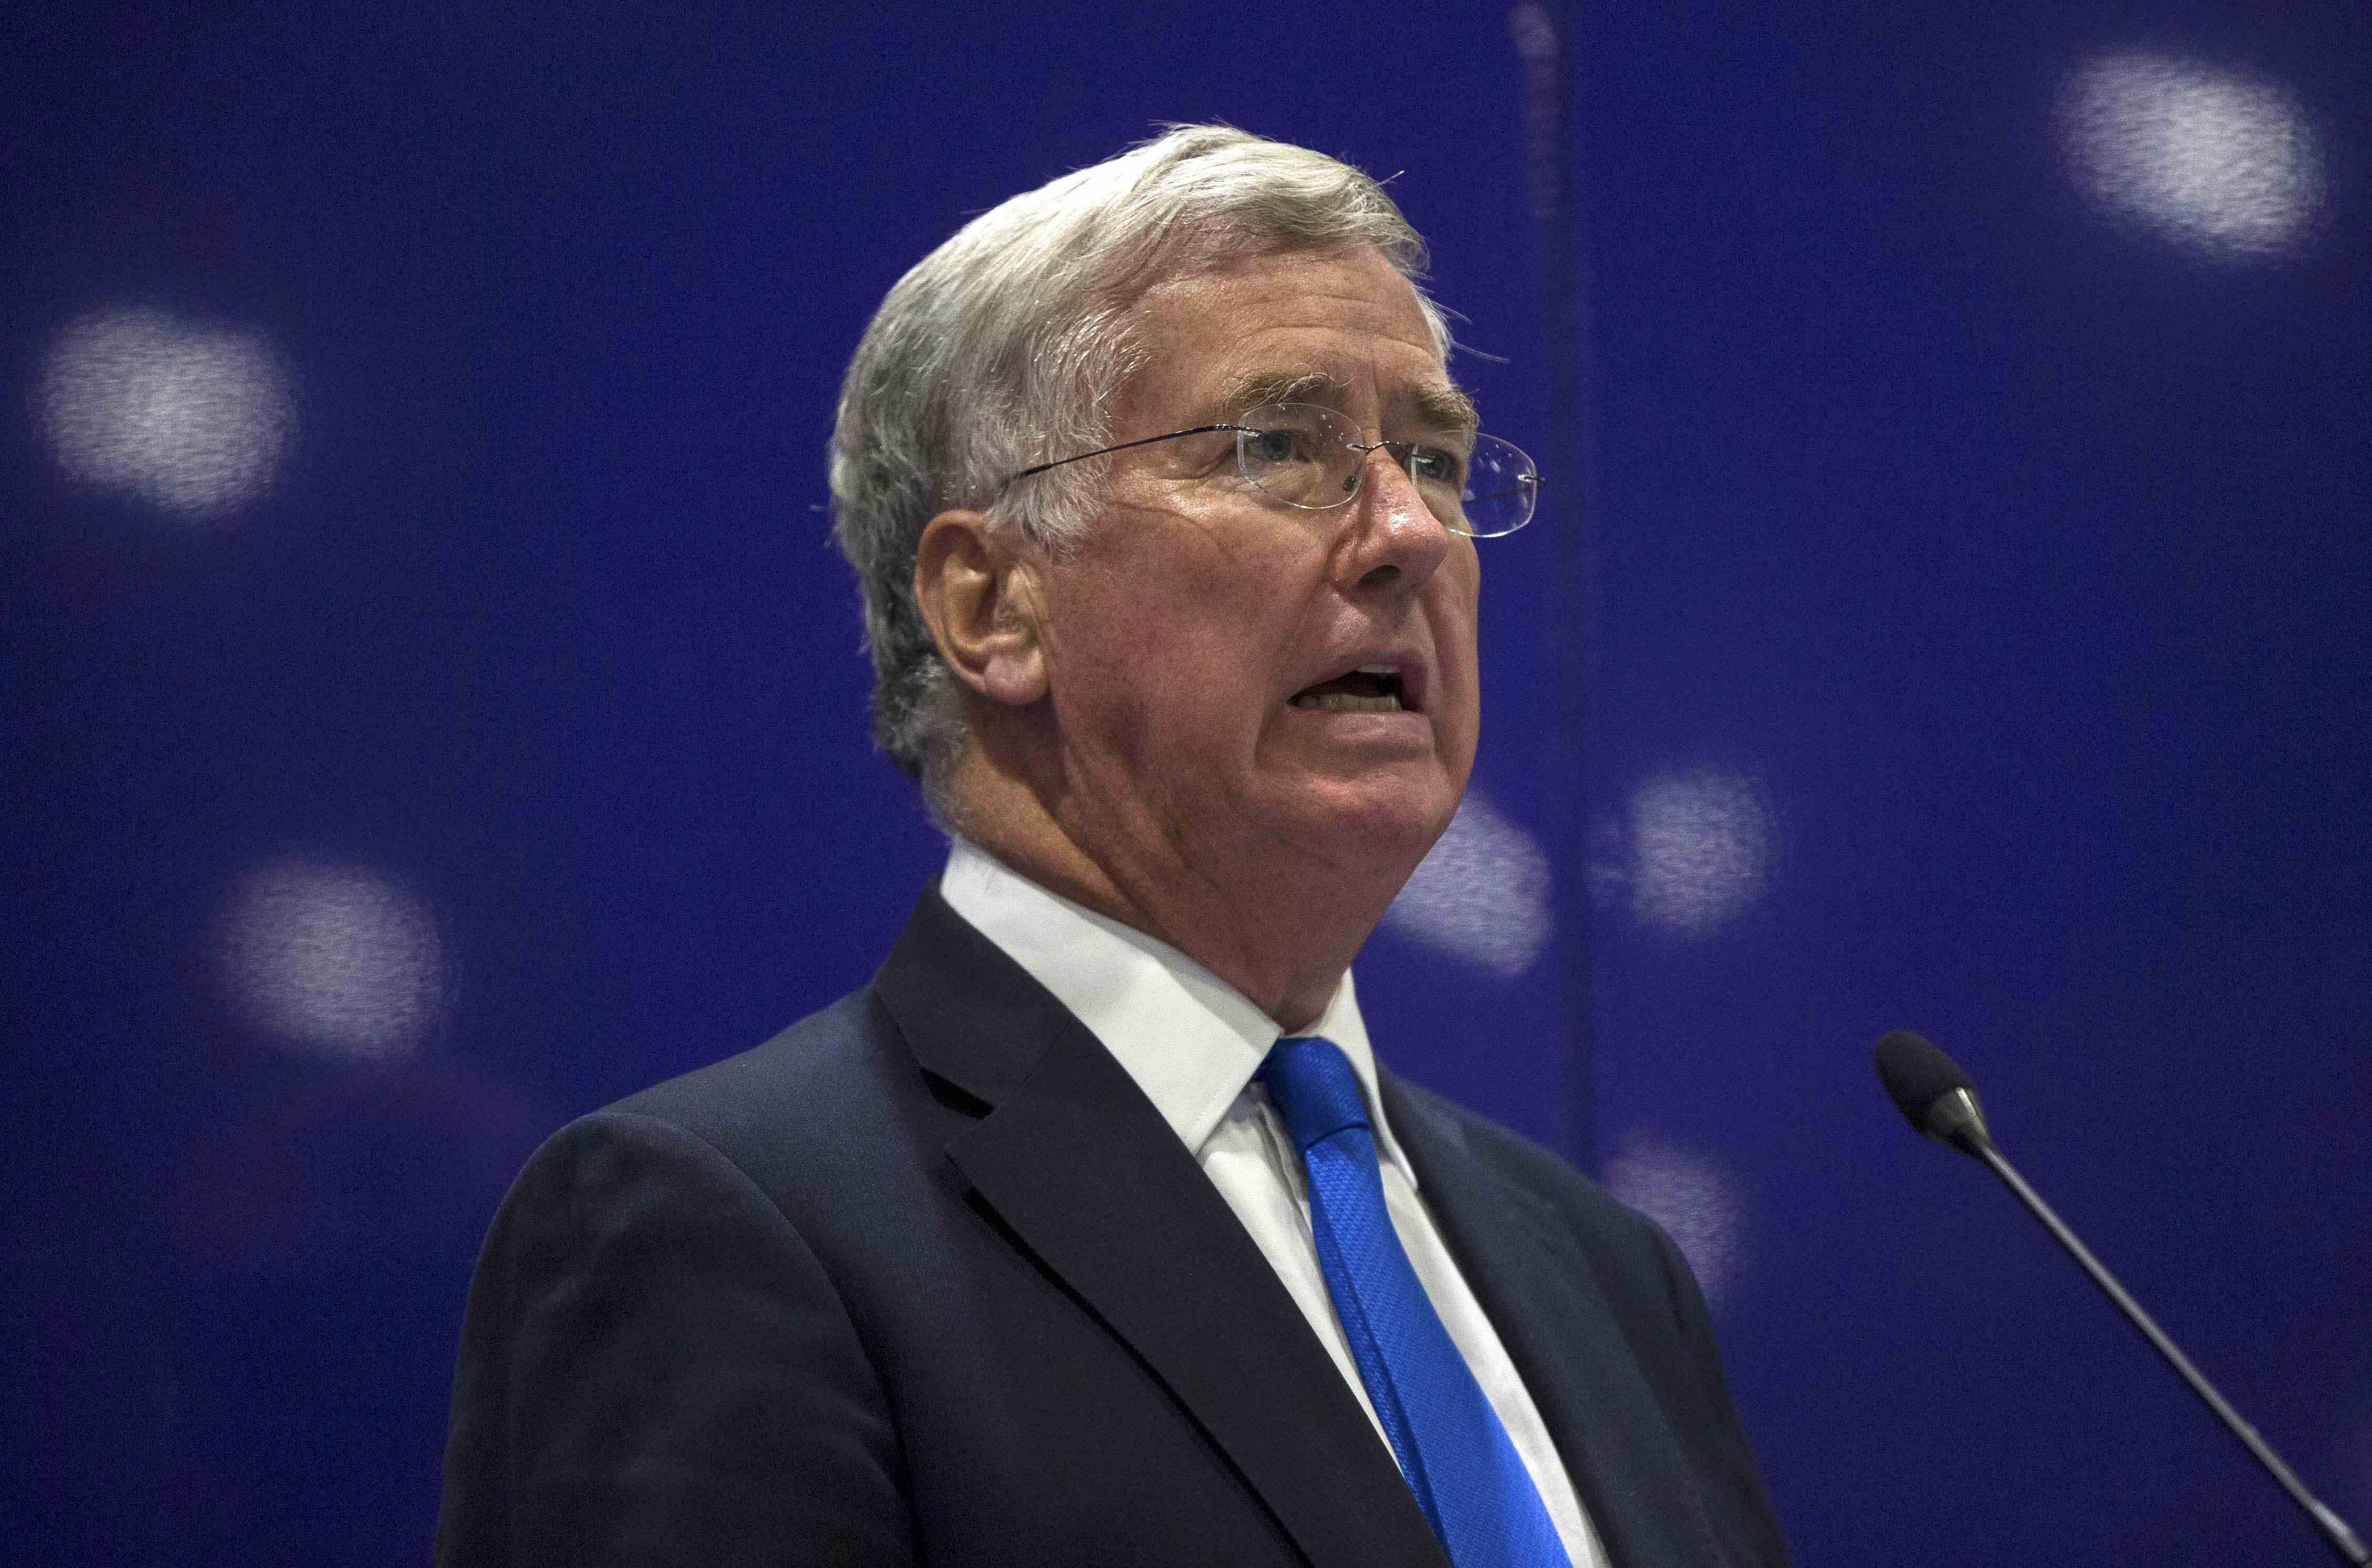 Britain's Secretary of Defence Michael Fallon delivers a speech at the Defence and Security Equipment International trade show in London, Britain September 16, 2015. REUTERS/Neil Hall